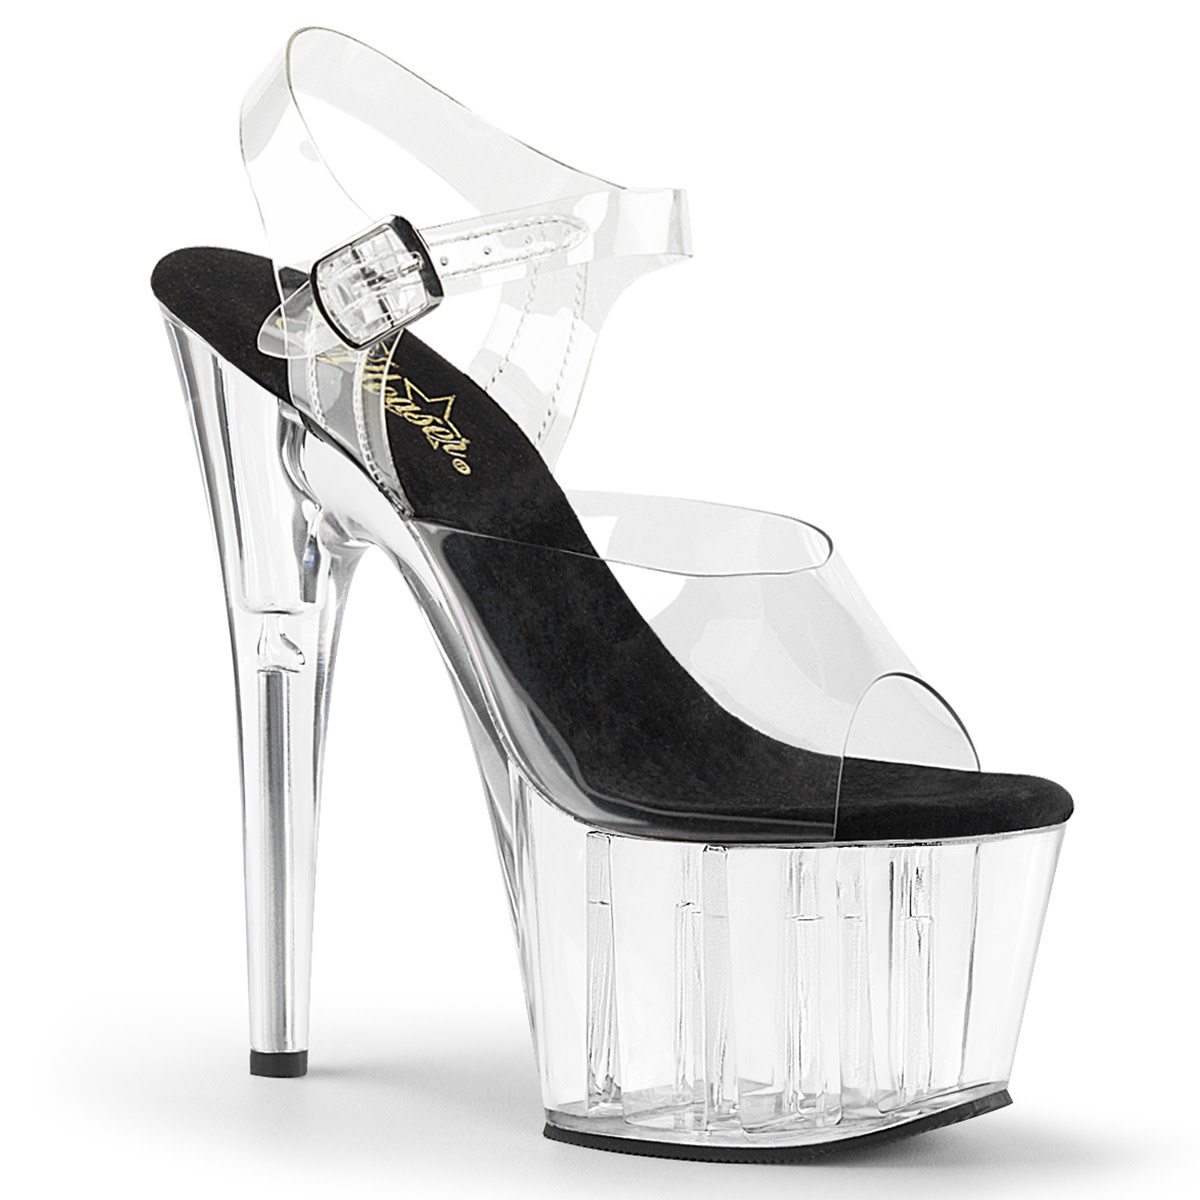 3 Inch Heel Clear Ankle Strap Sandals | BELLE-308 Clear – Shoecup.com